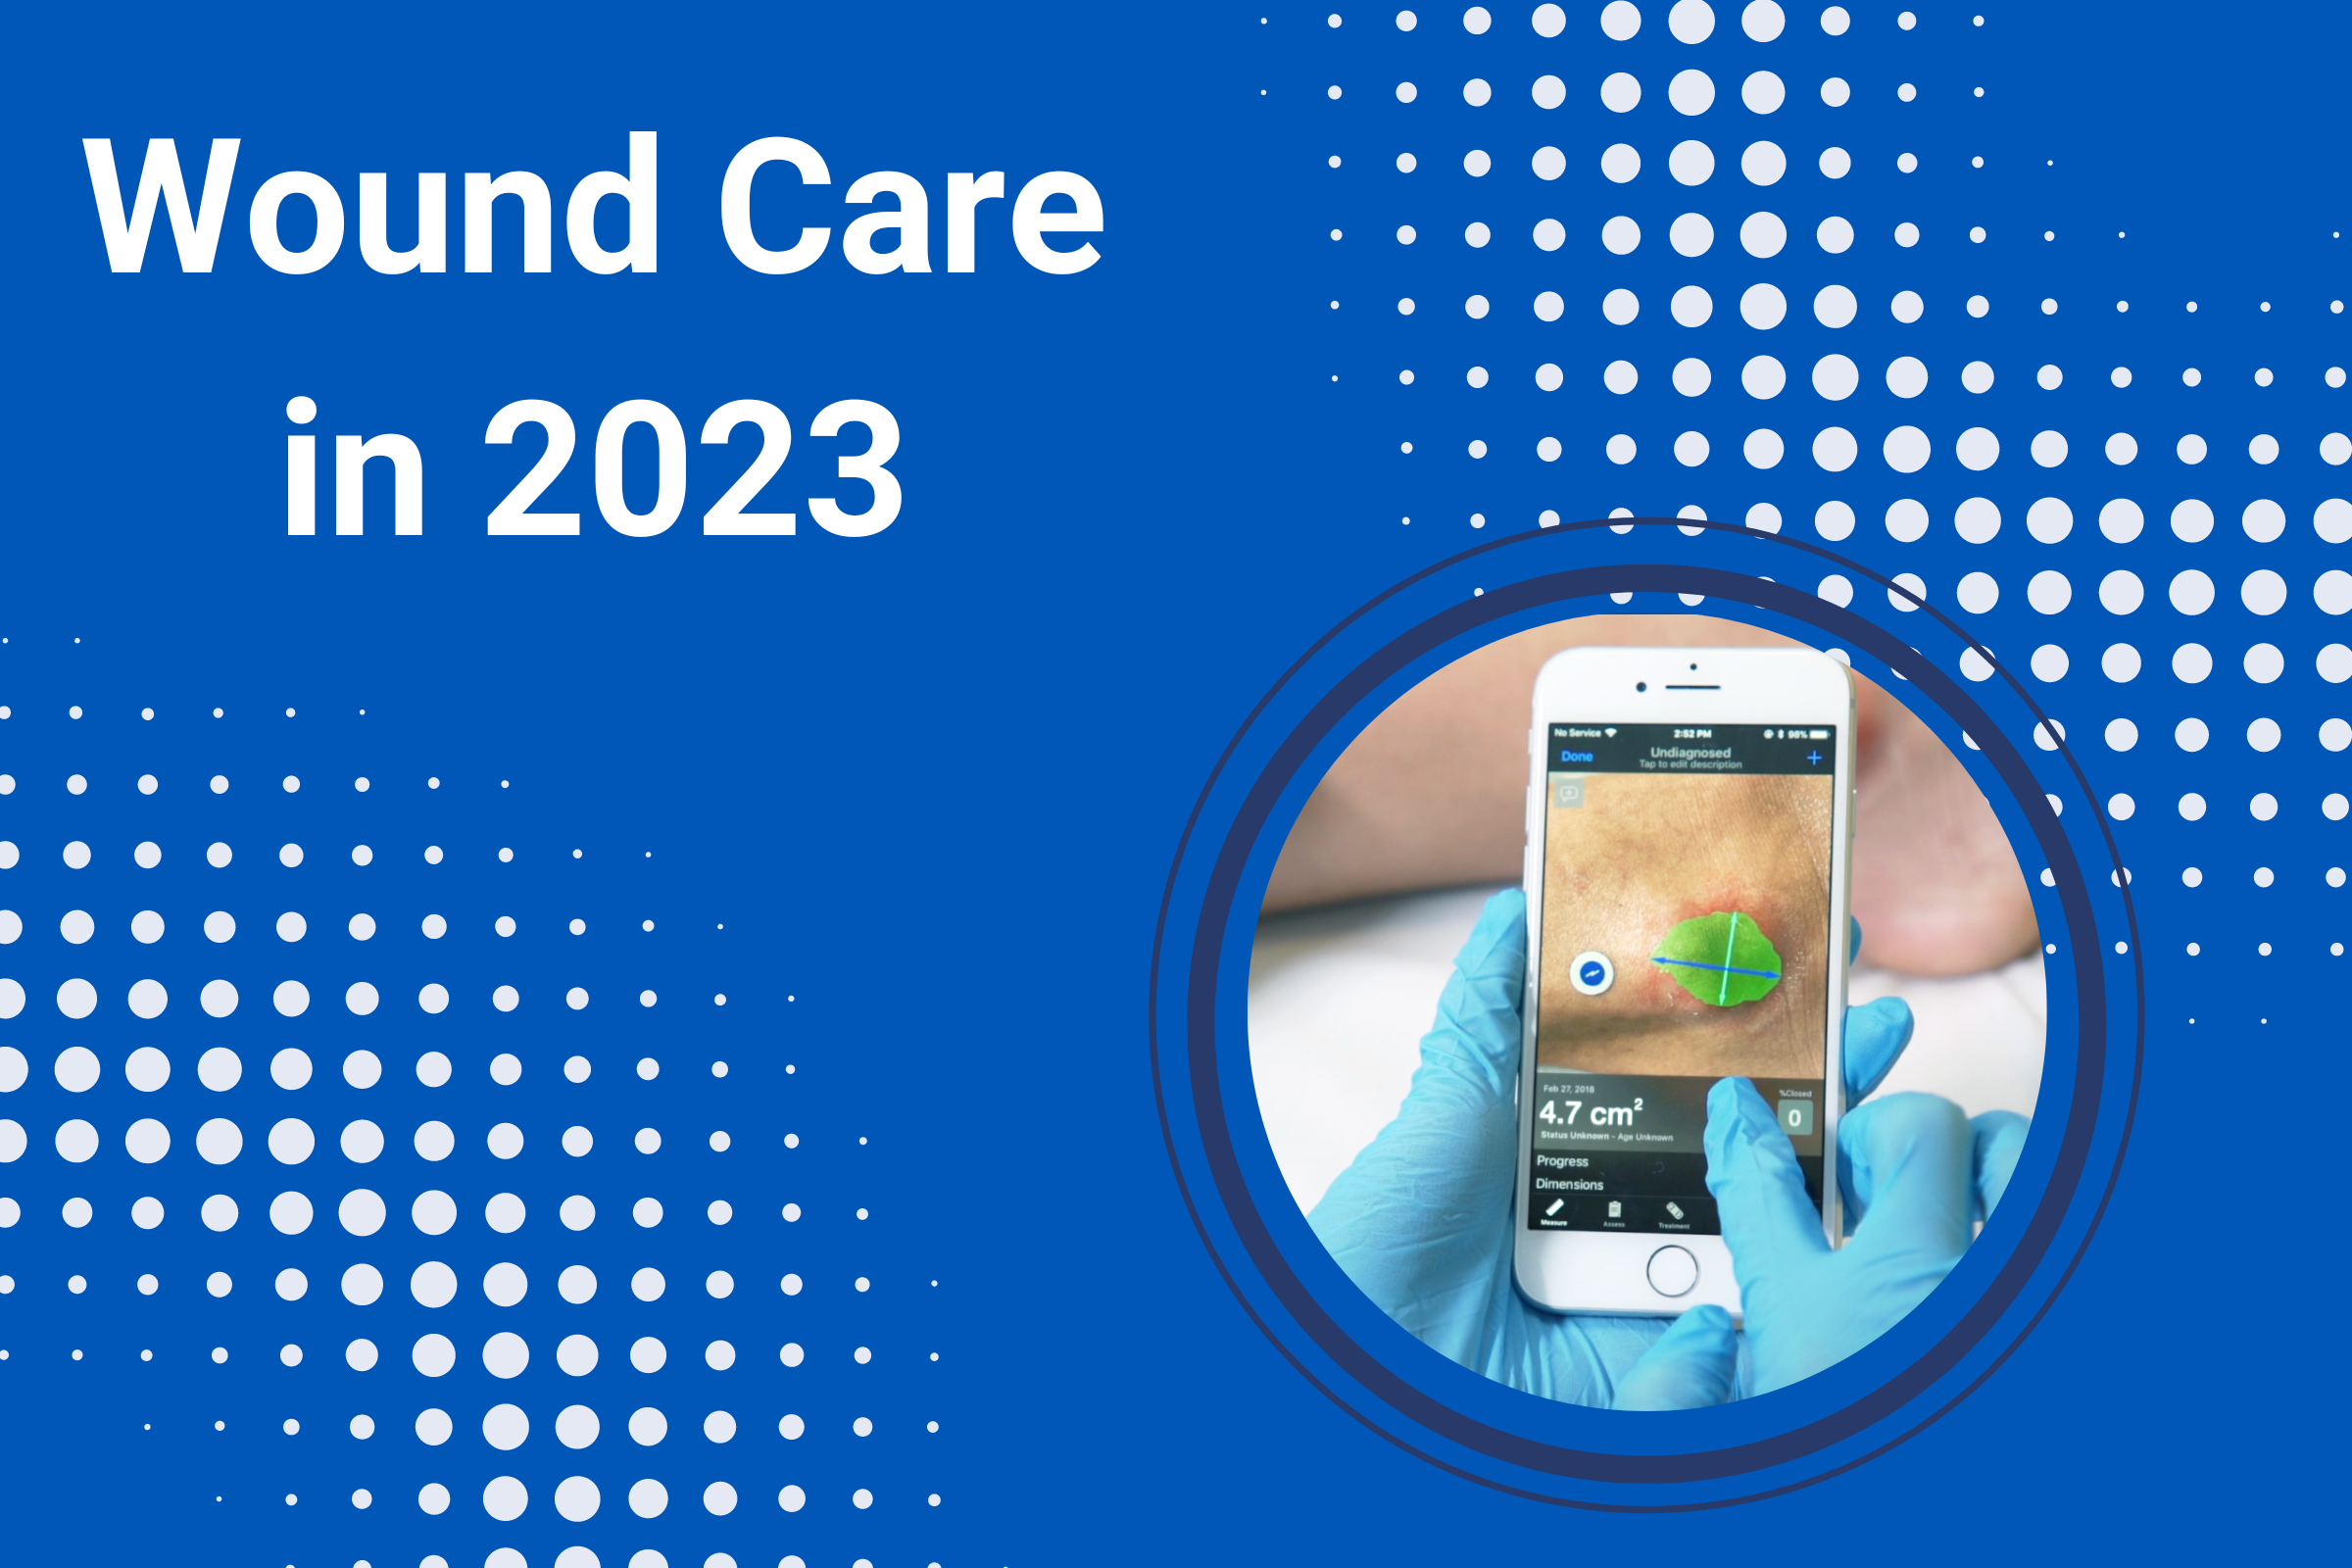 Wound Care in 2023